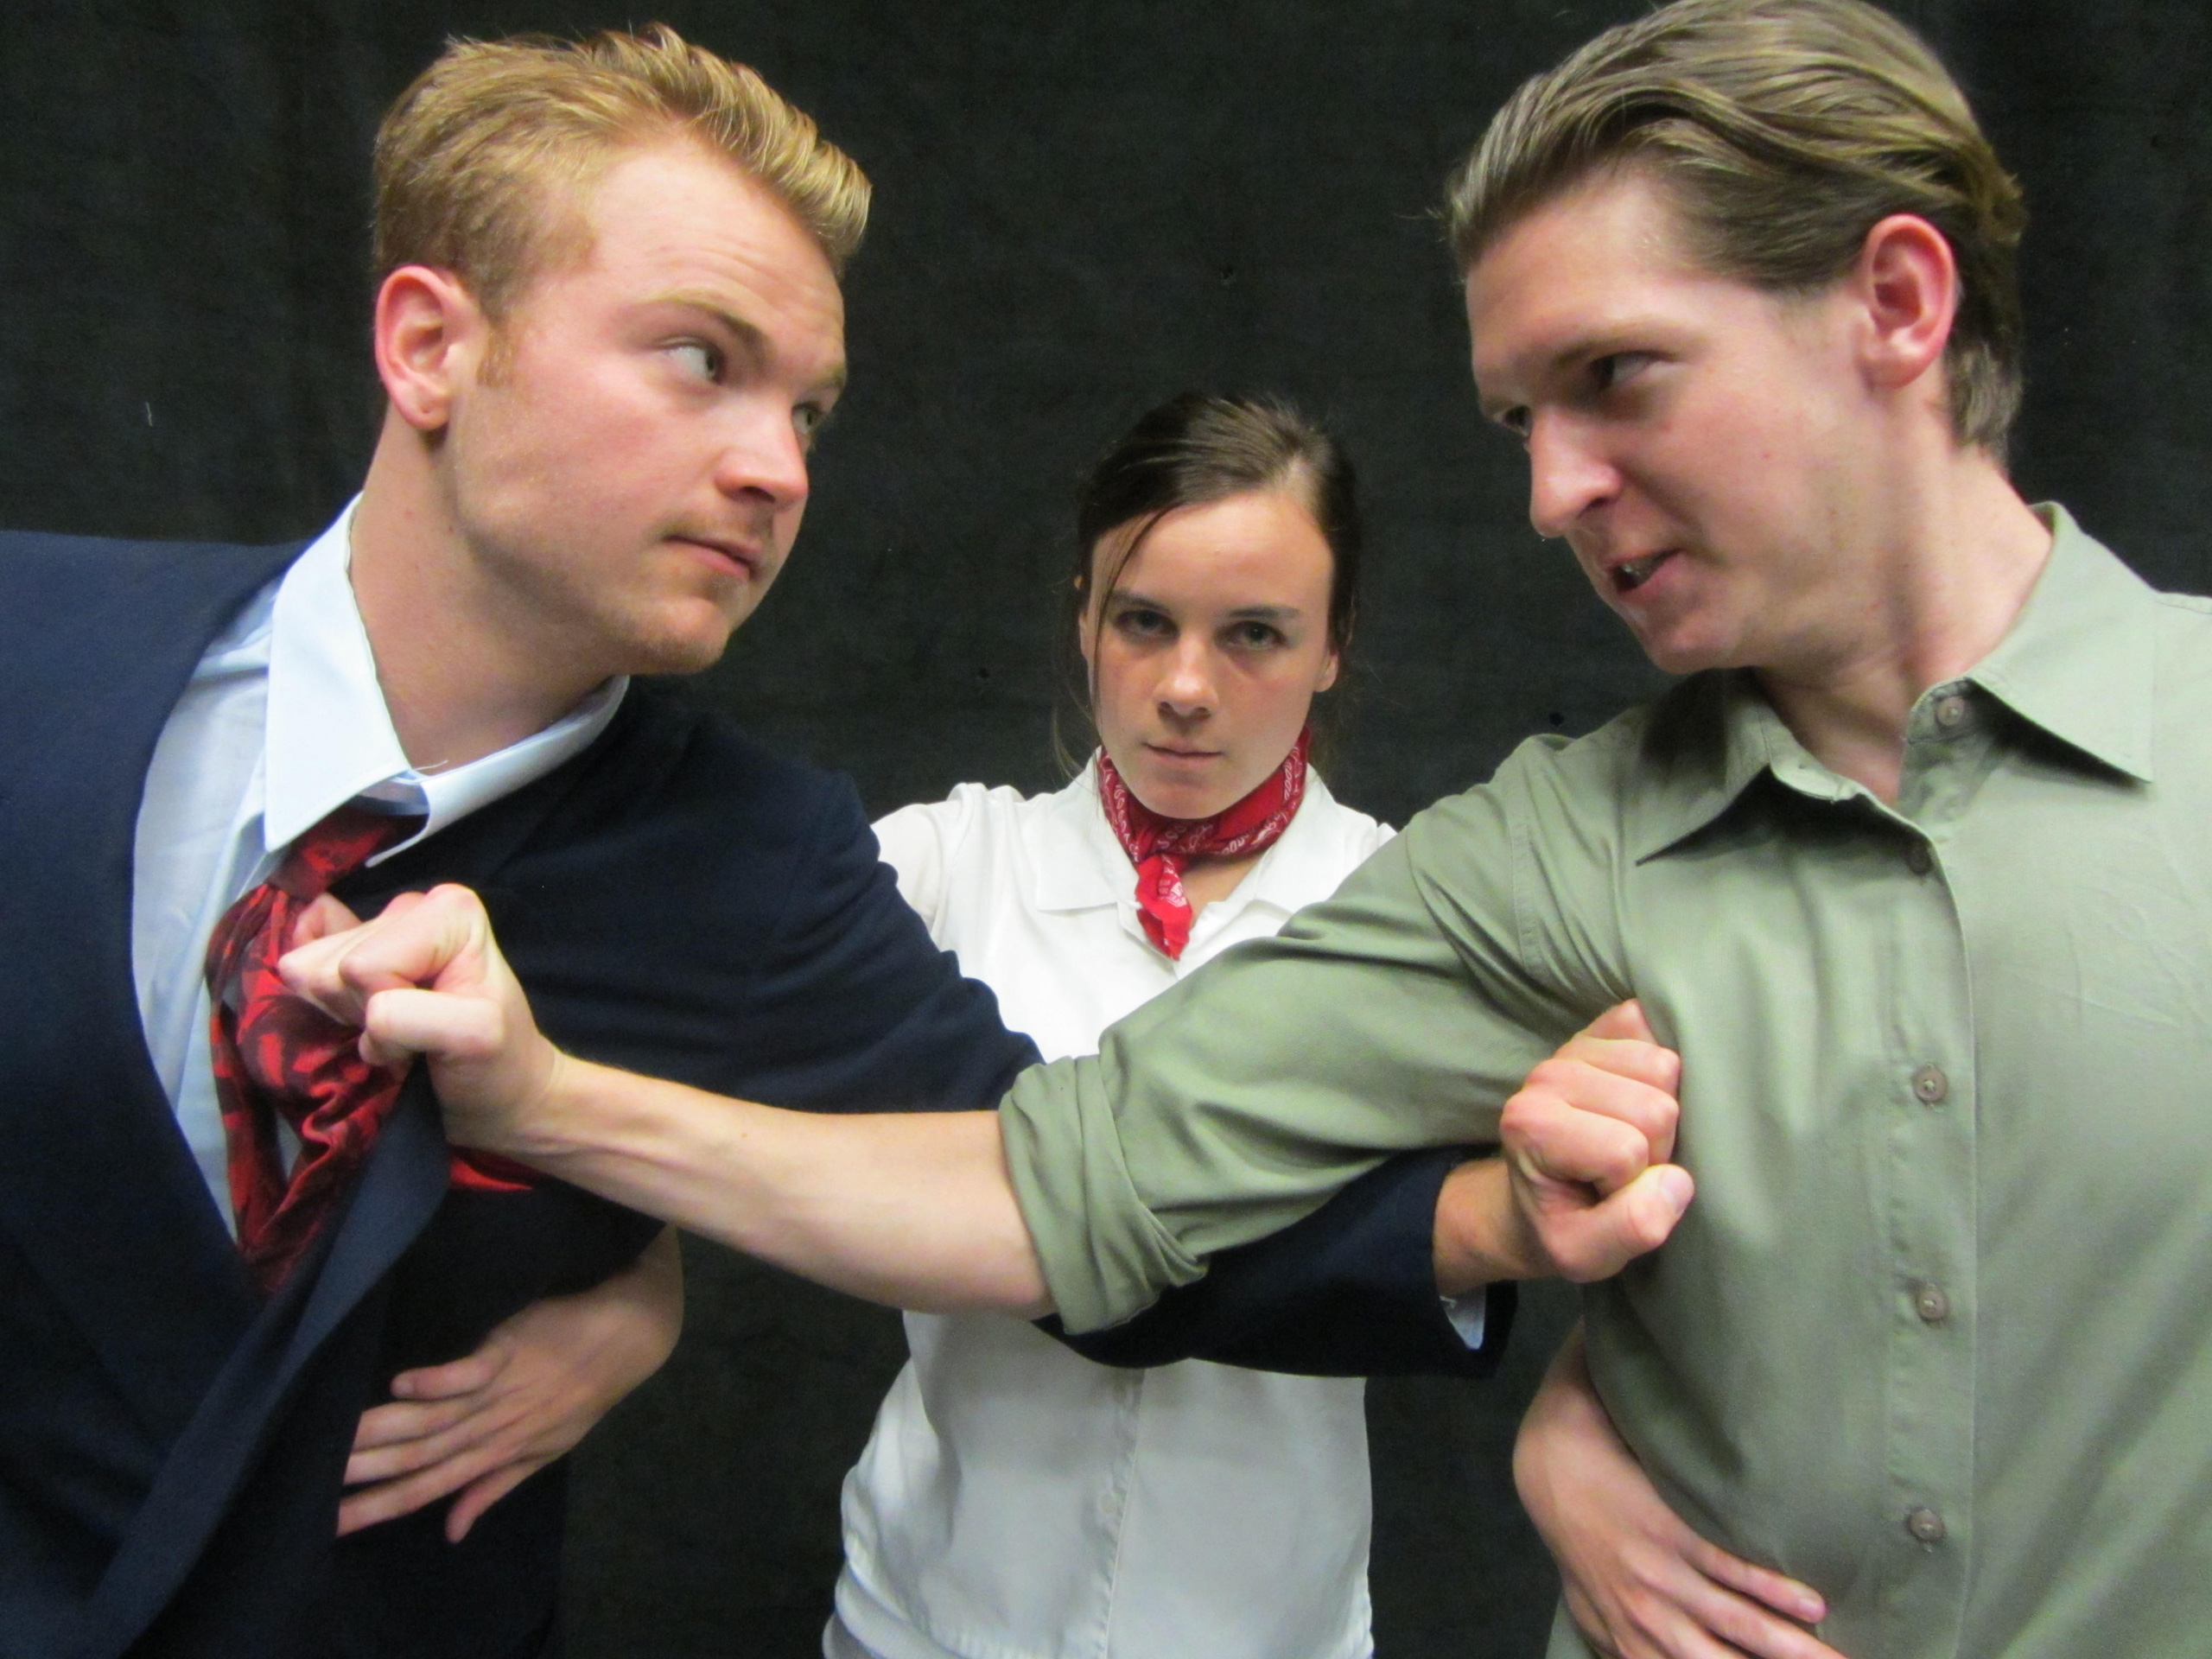 Two men seem prepared to fight, a woman tries to keep them separated.